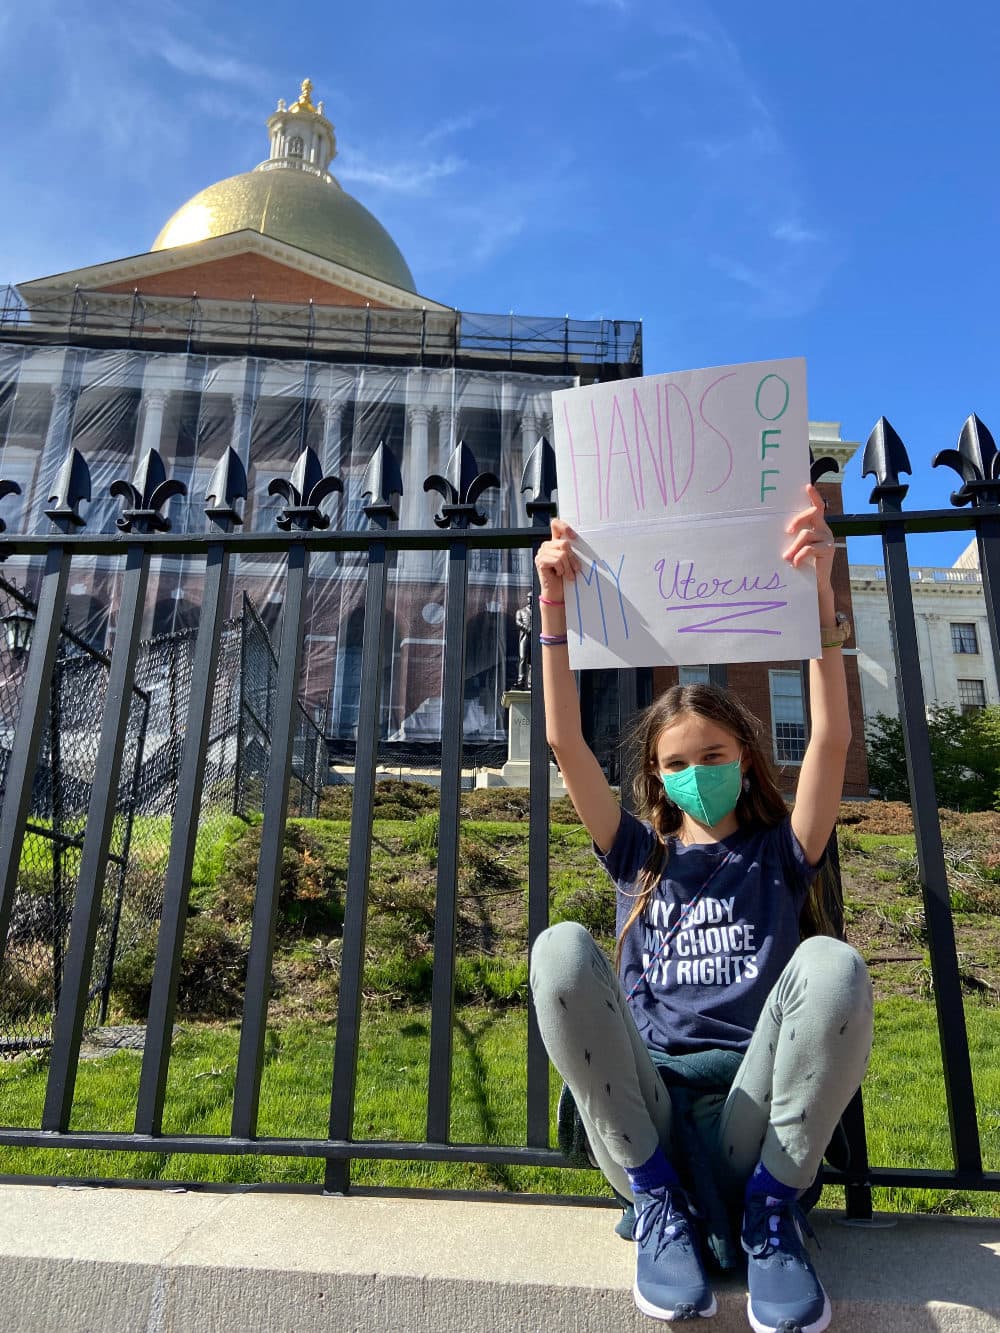 The author's daughter holding a protest sign at the State House, Boston, Mass. (Courtesy Anri Wheeler)